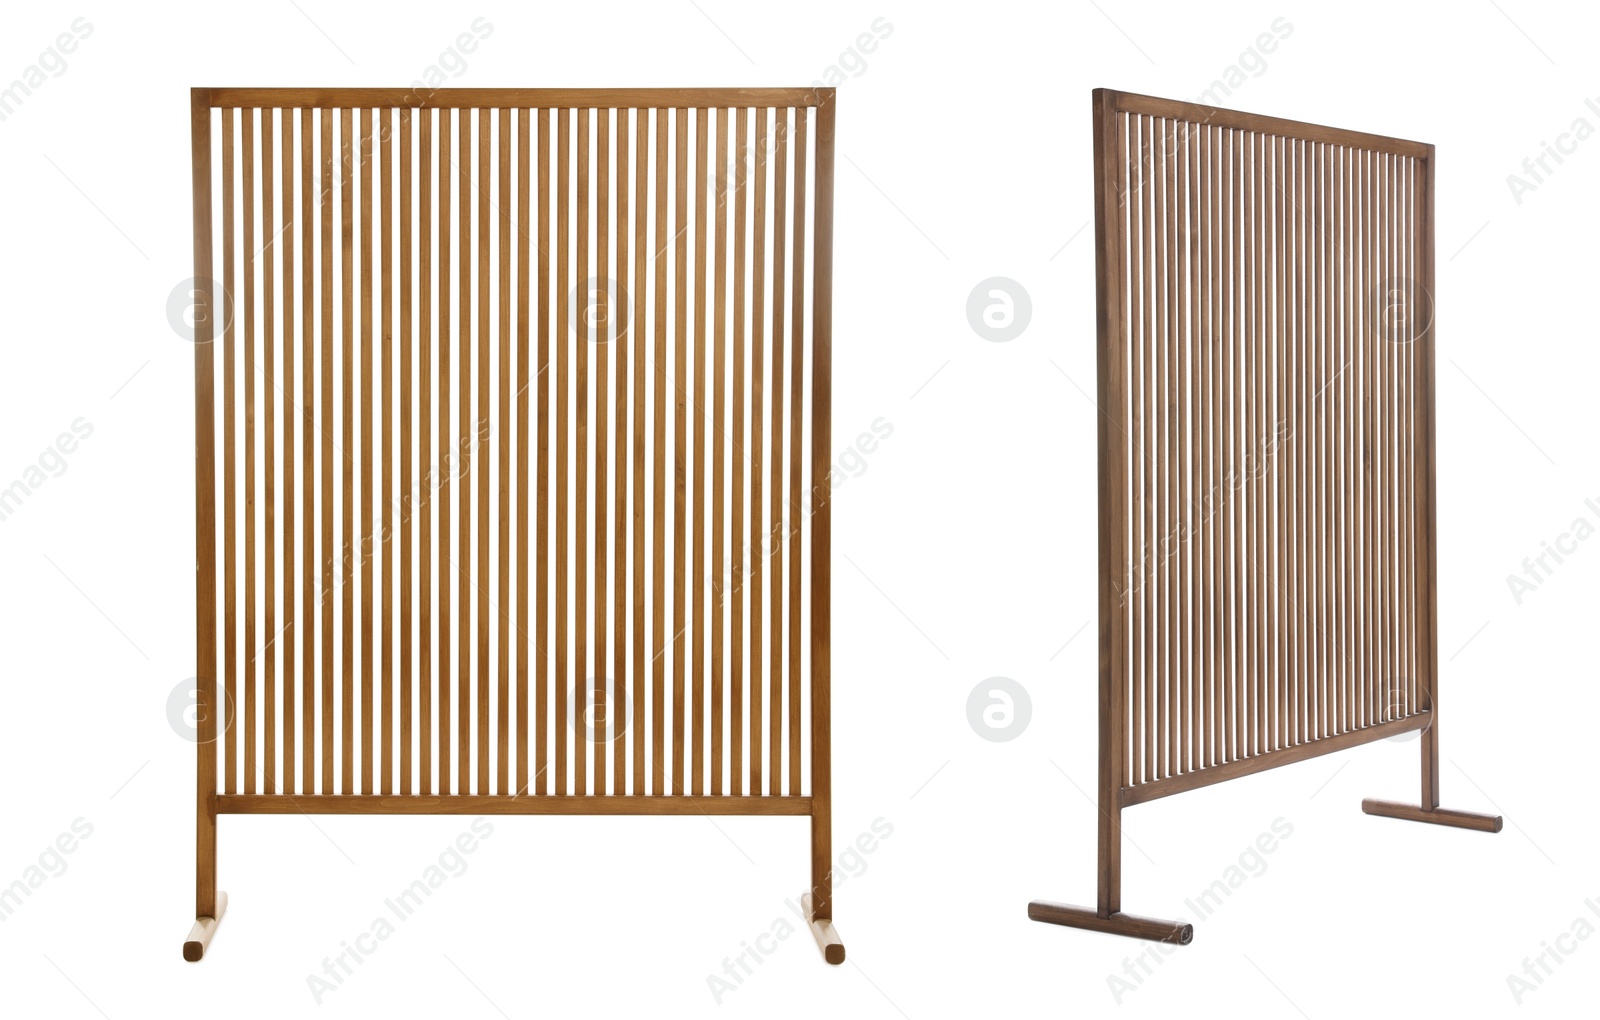 Image of Set with photos of wooden room divider screen on white background